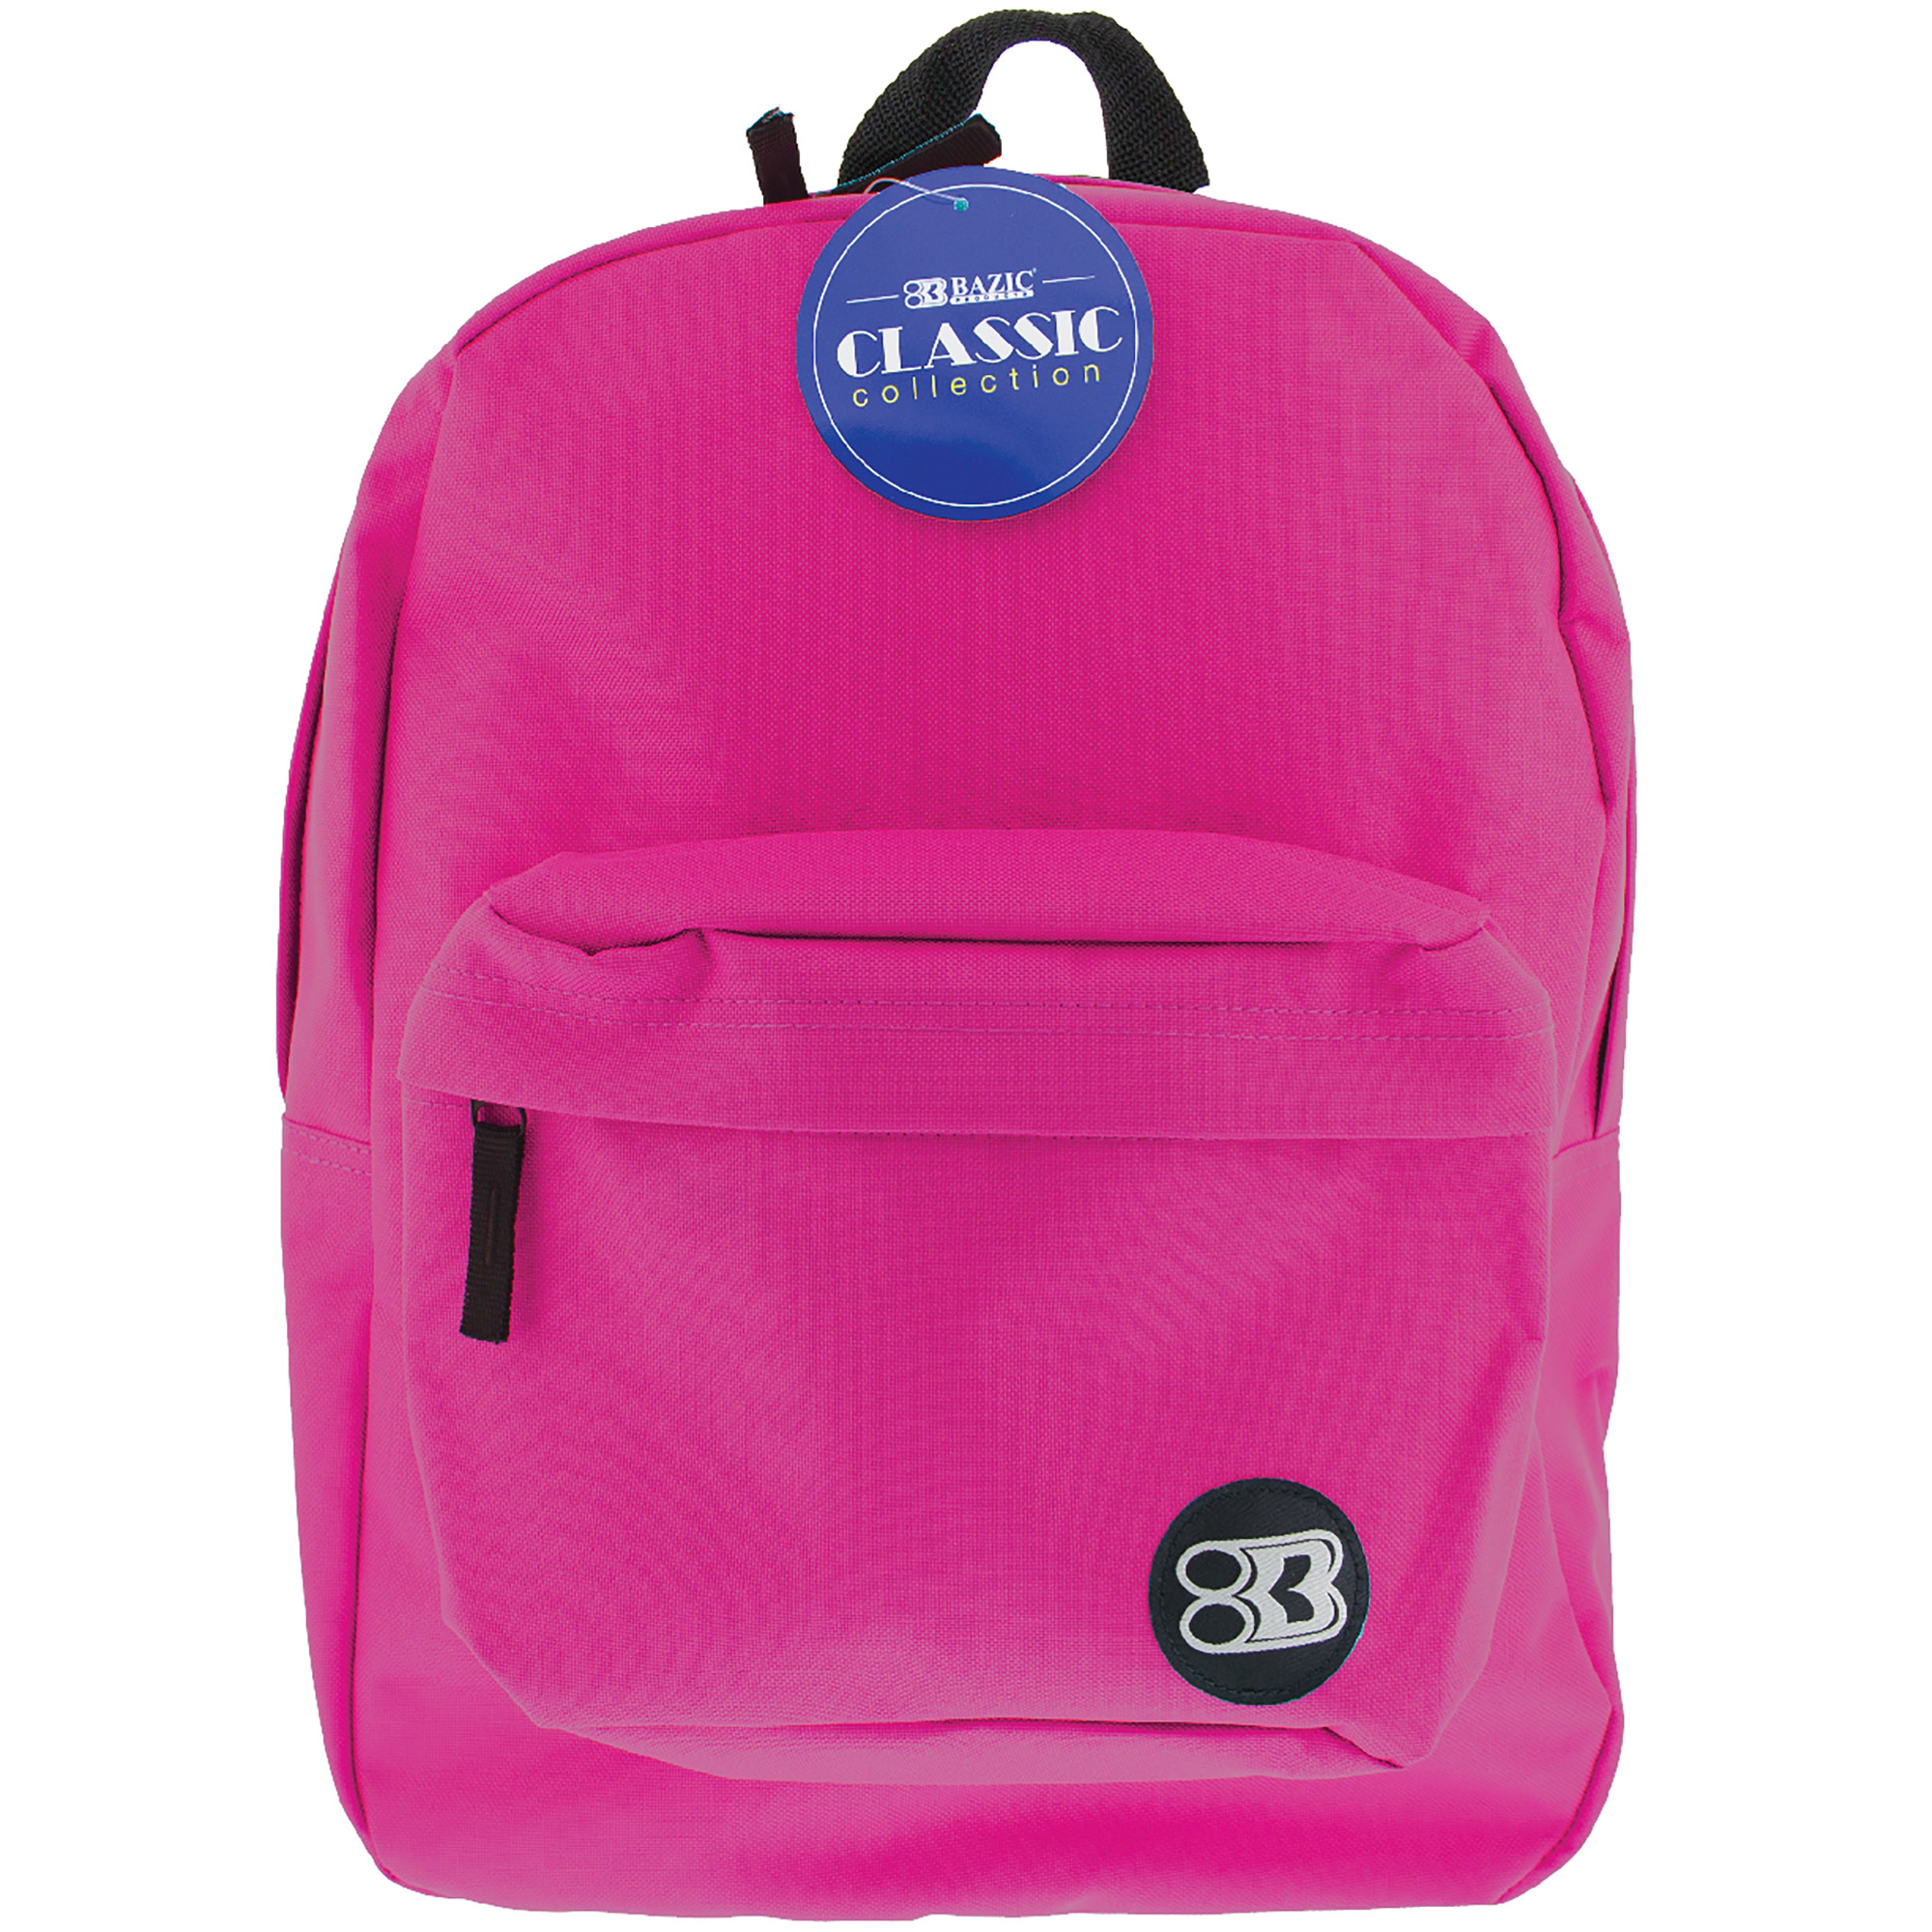 BAZIC School Backpack Classic 17" Fuchsia, School Bag for Students, 1-Pack - image 1 of 7